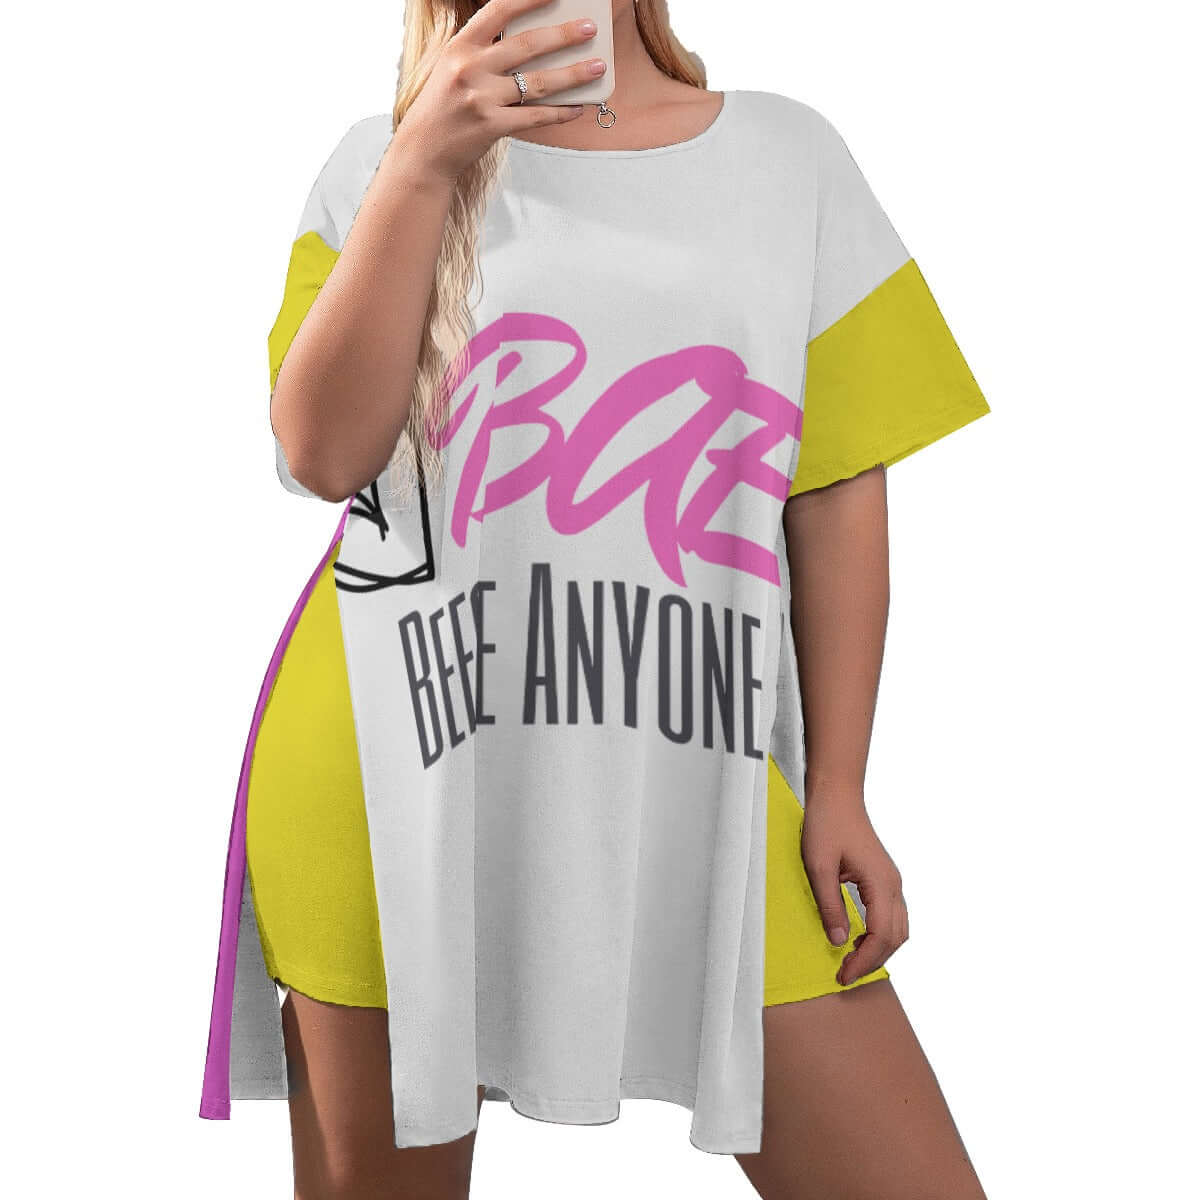 BAE "Before Anyone Else "All-Over Print Women's Drop-Shoulder T-Shirt with Side Split and Shorts (Plus Size)